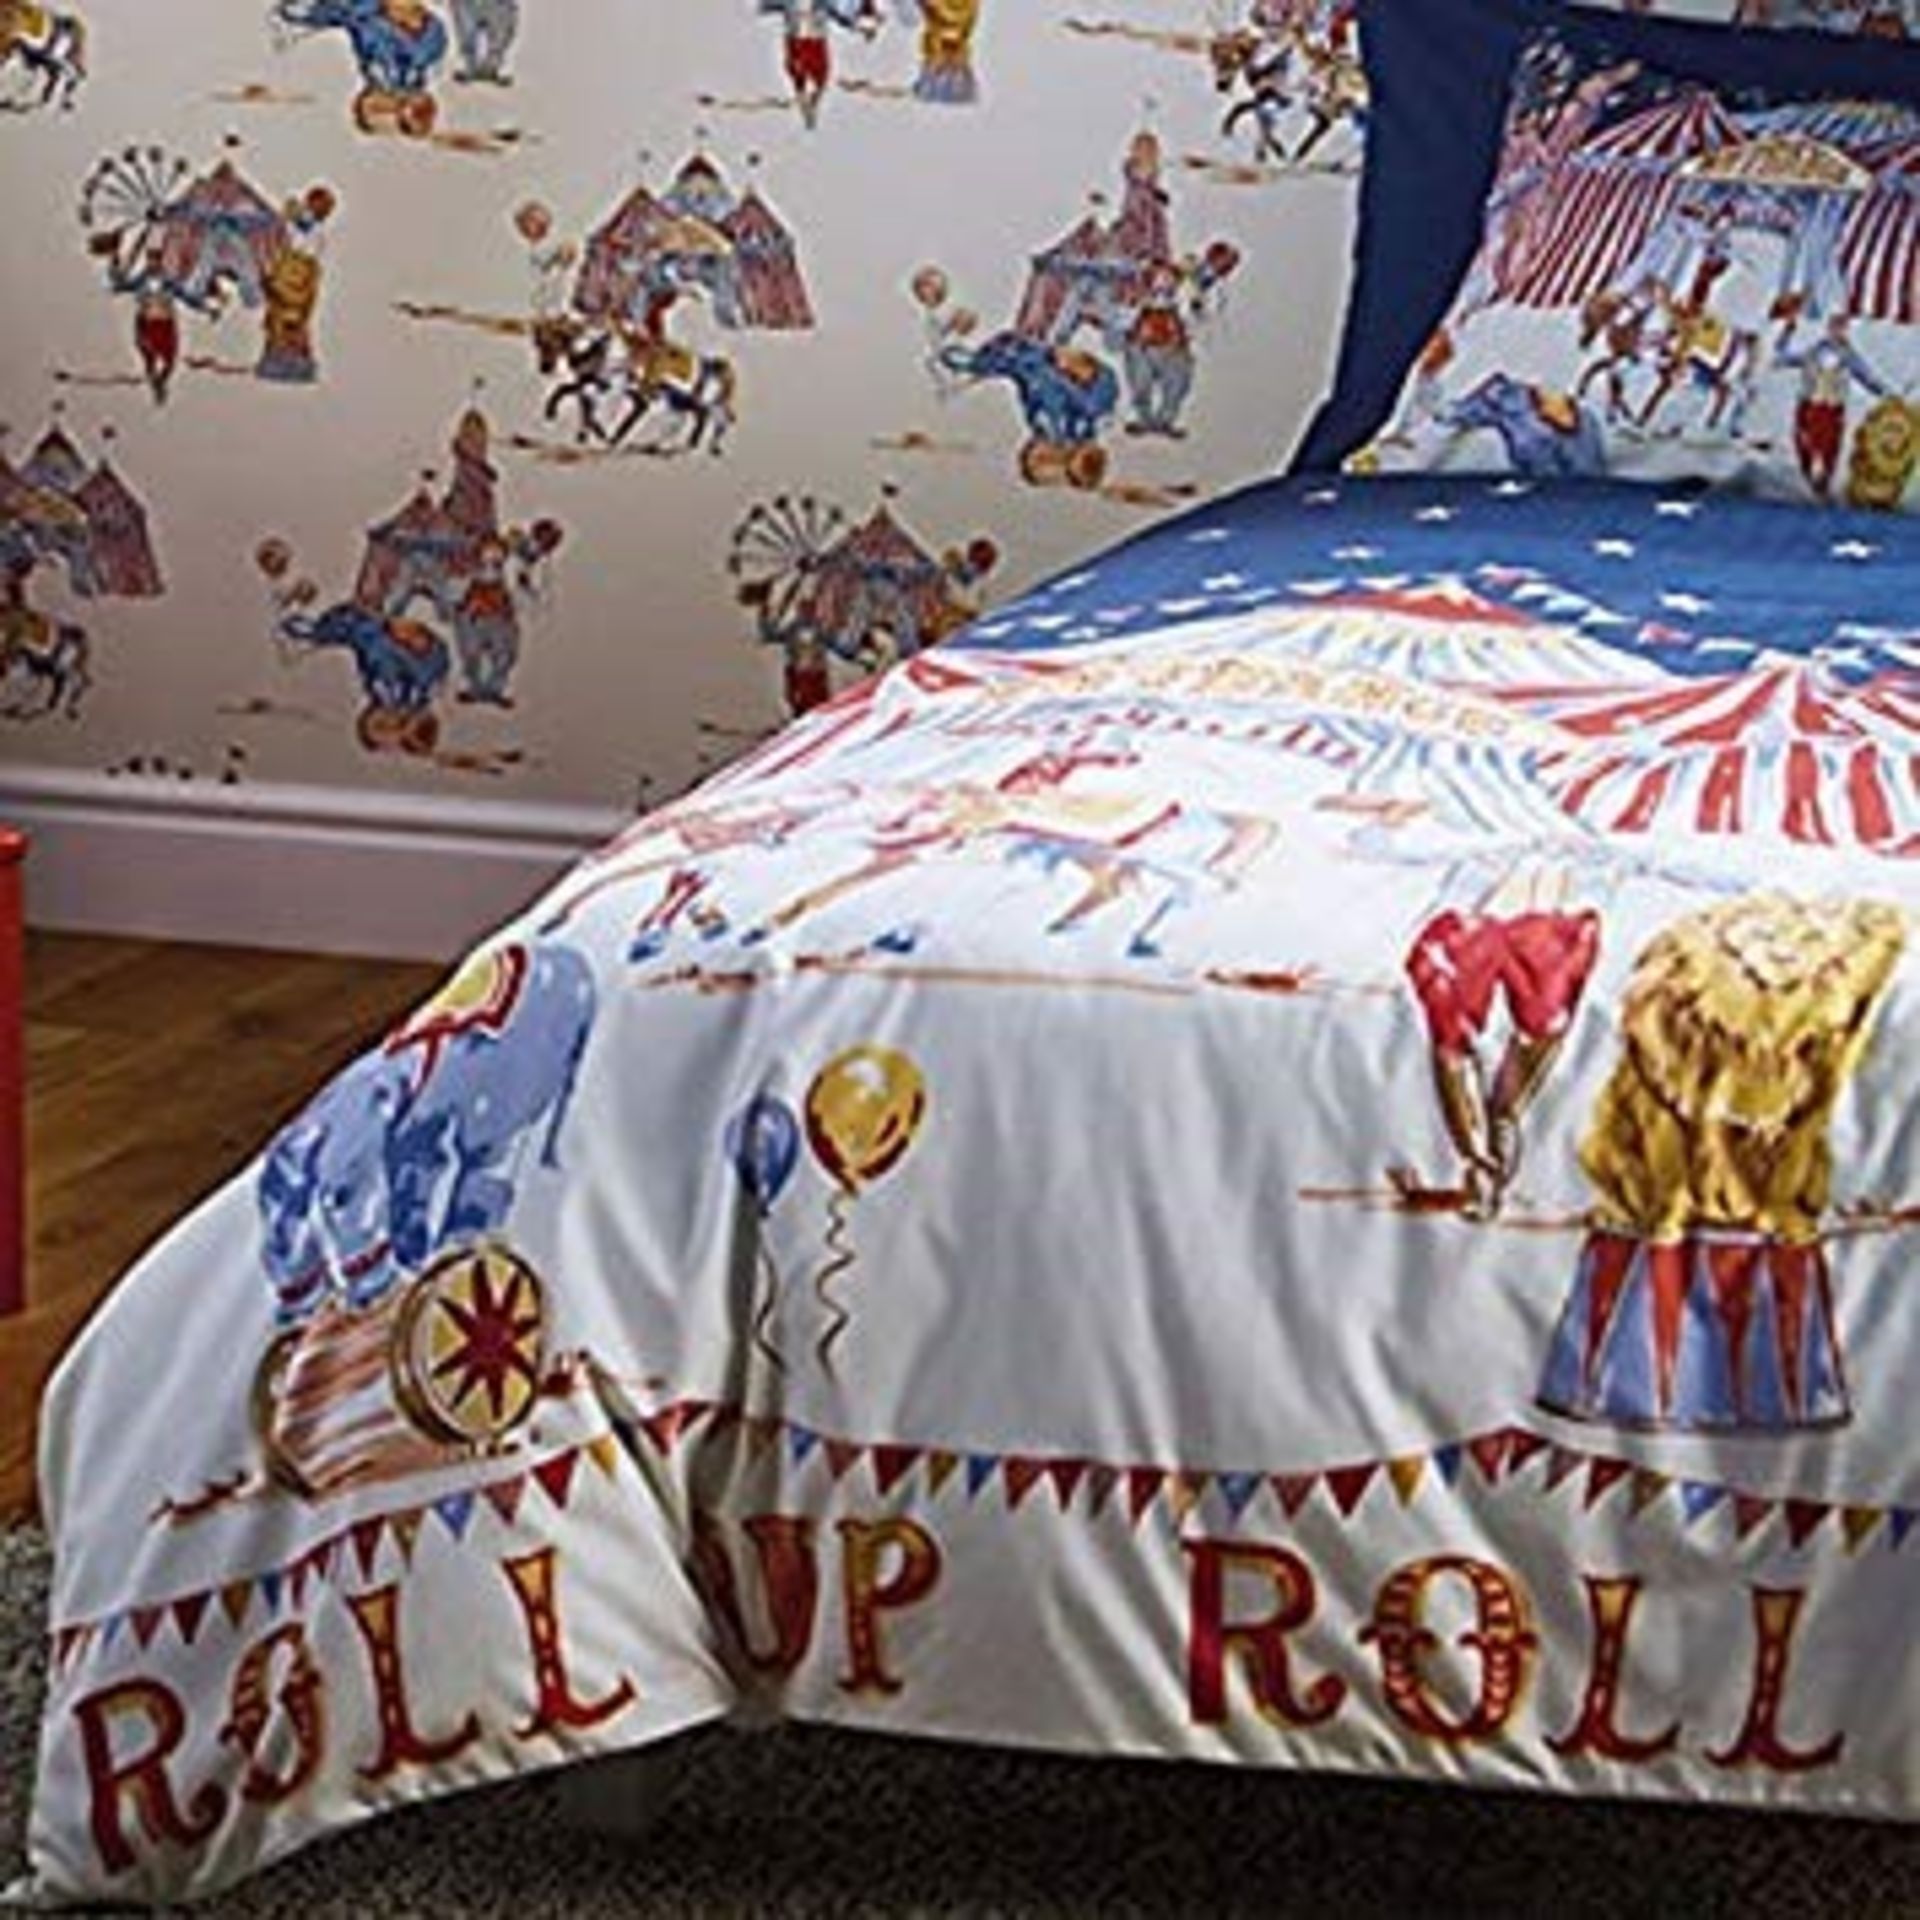 1 BRAND NEW PACKAGED ARTHOUSE CIRCUS FUN KIDS DUVET SET 4704 (VIEWING HIGHLY RECOMMENDED)